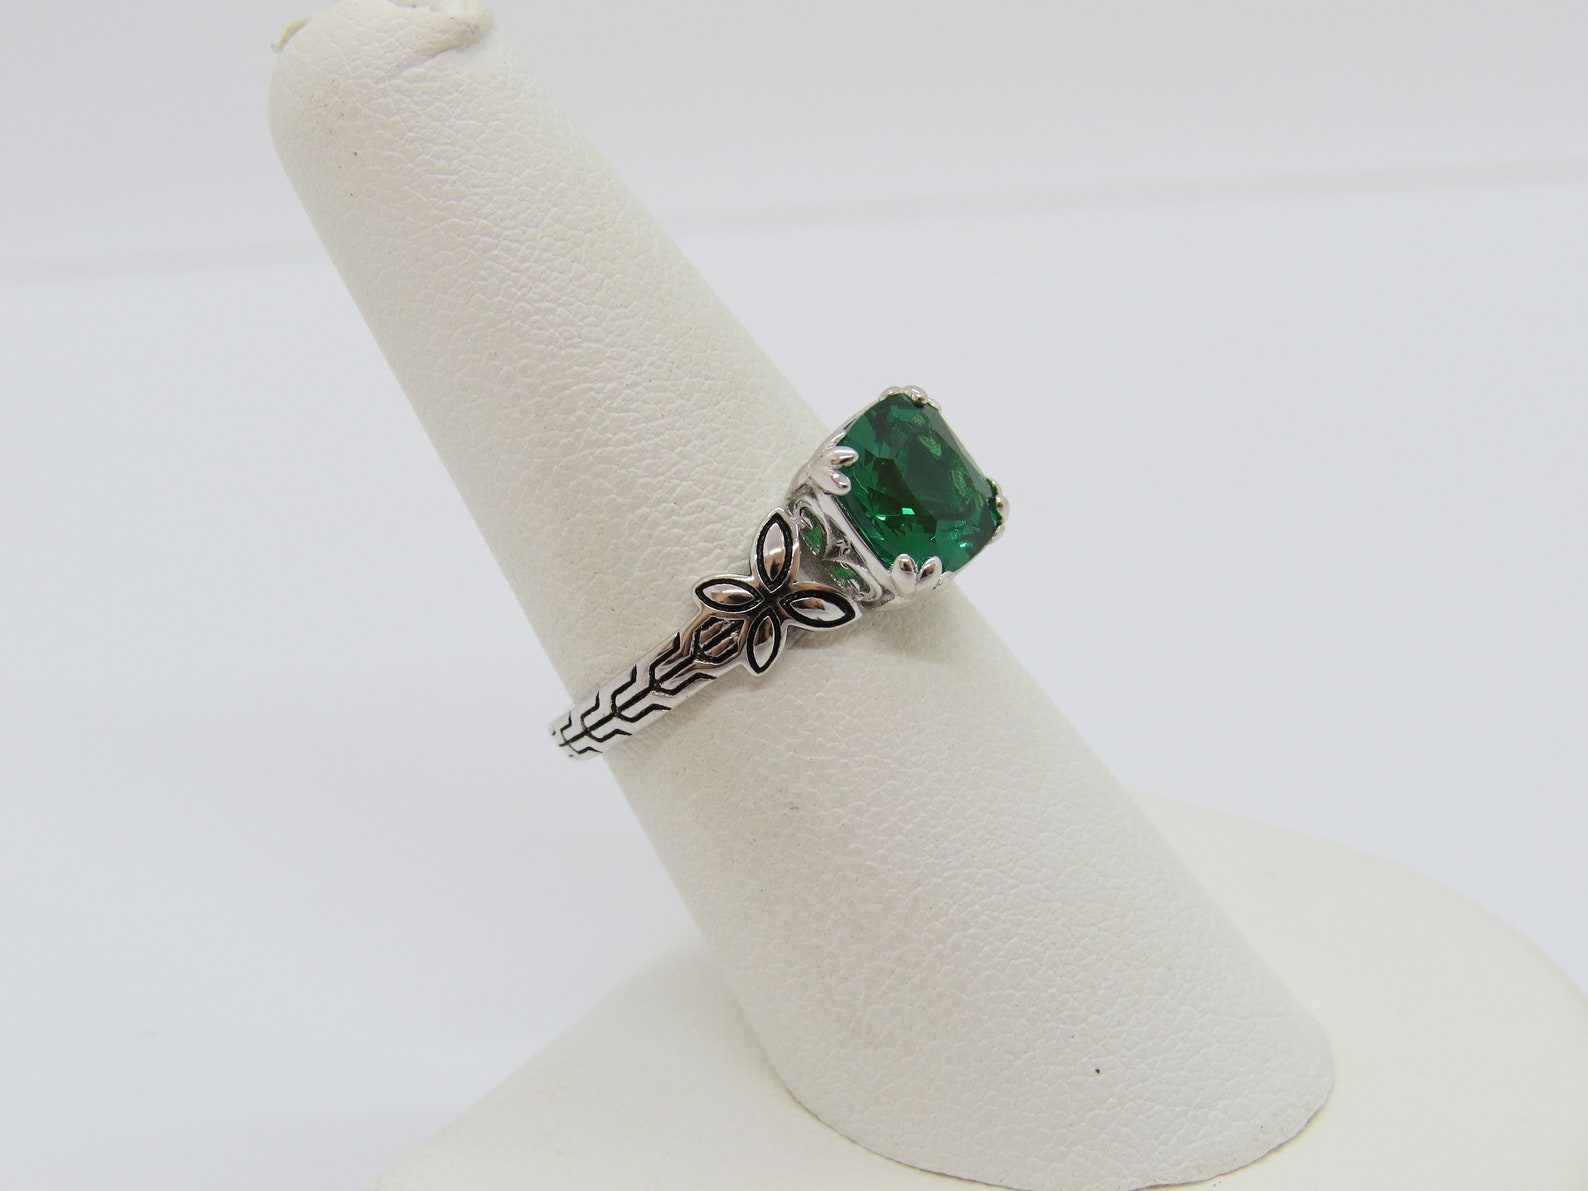 Vintage Sterling Silver Cushion Cut Emerald Carved Ring Size 9 - Etsy